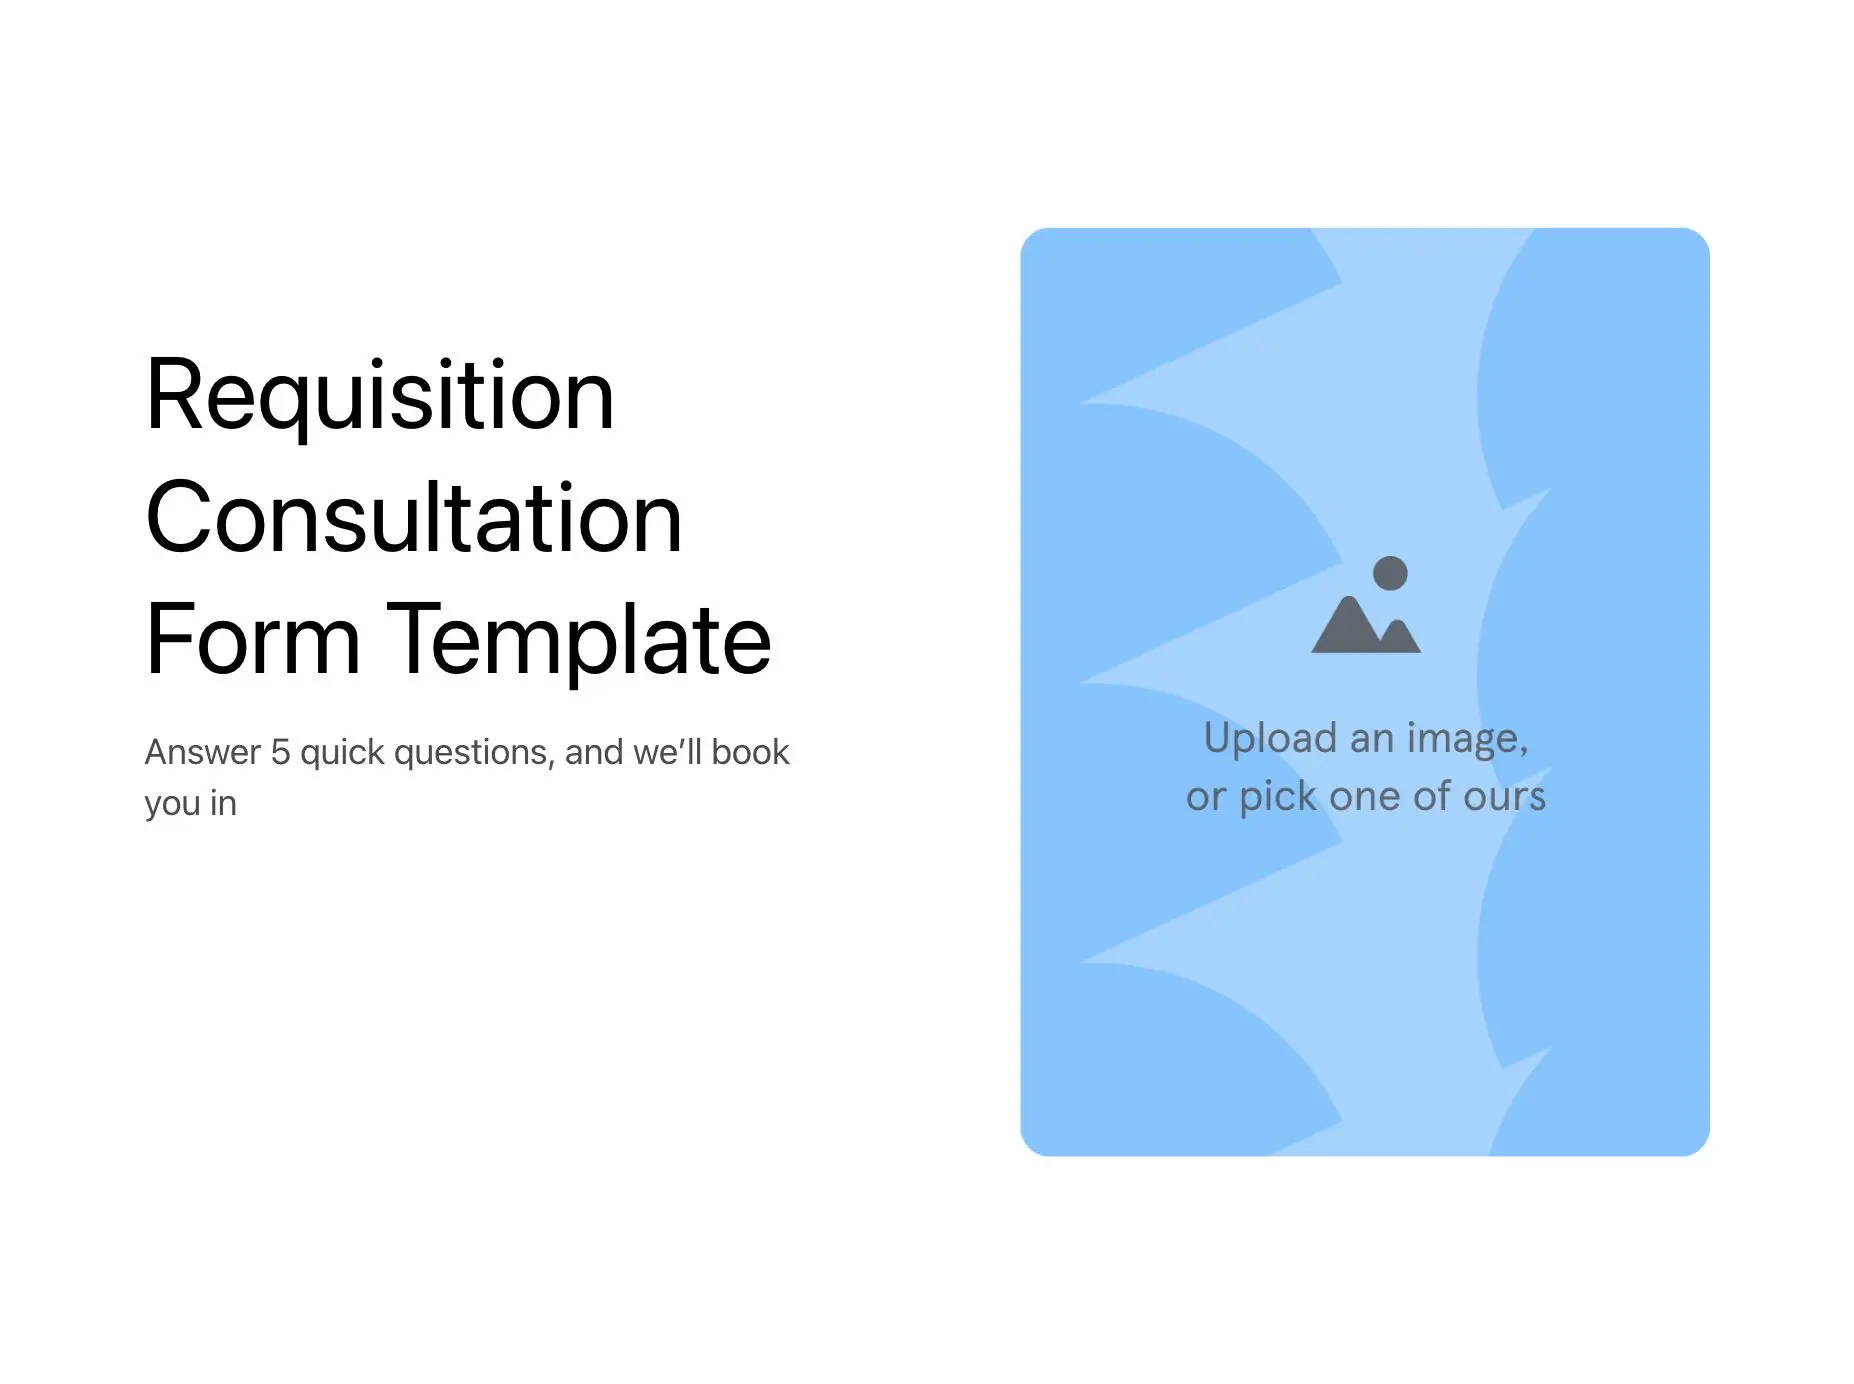 Requisition Consultation Form Template Hero